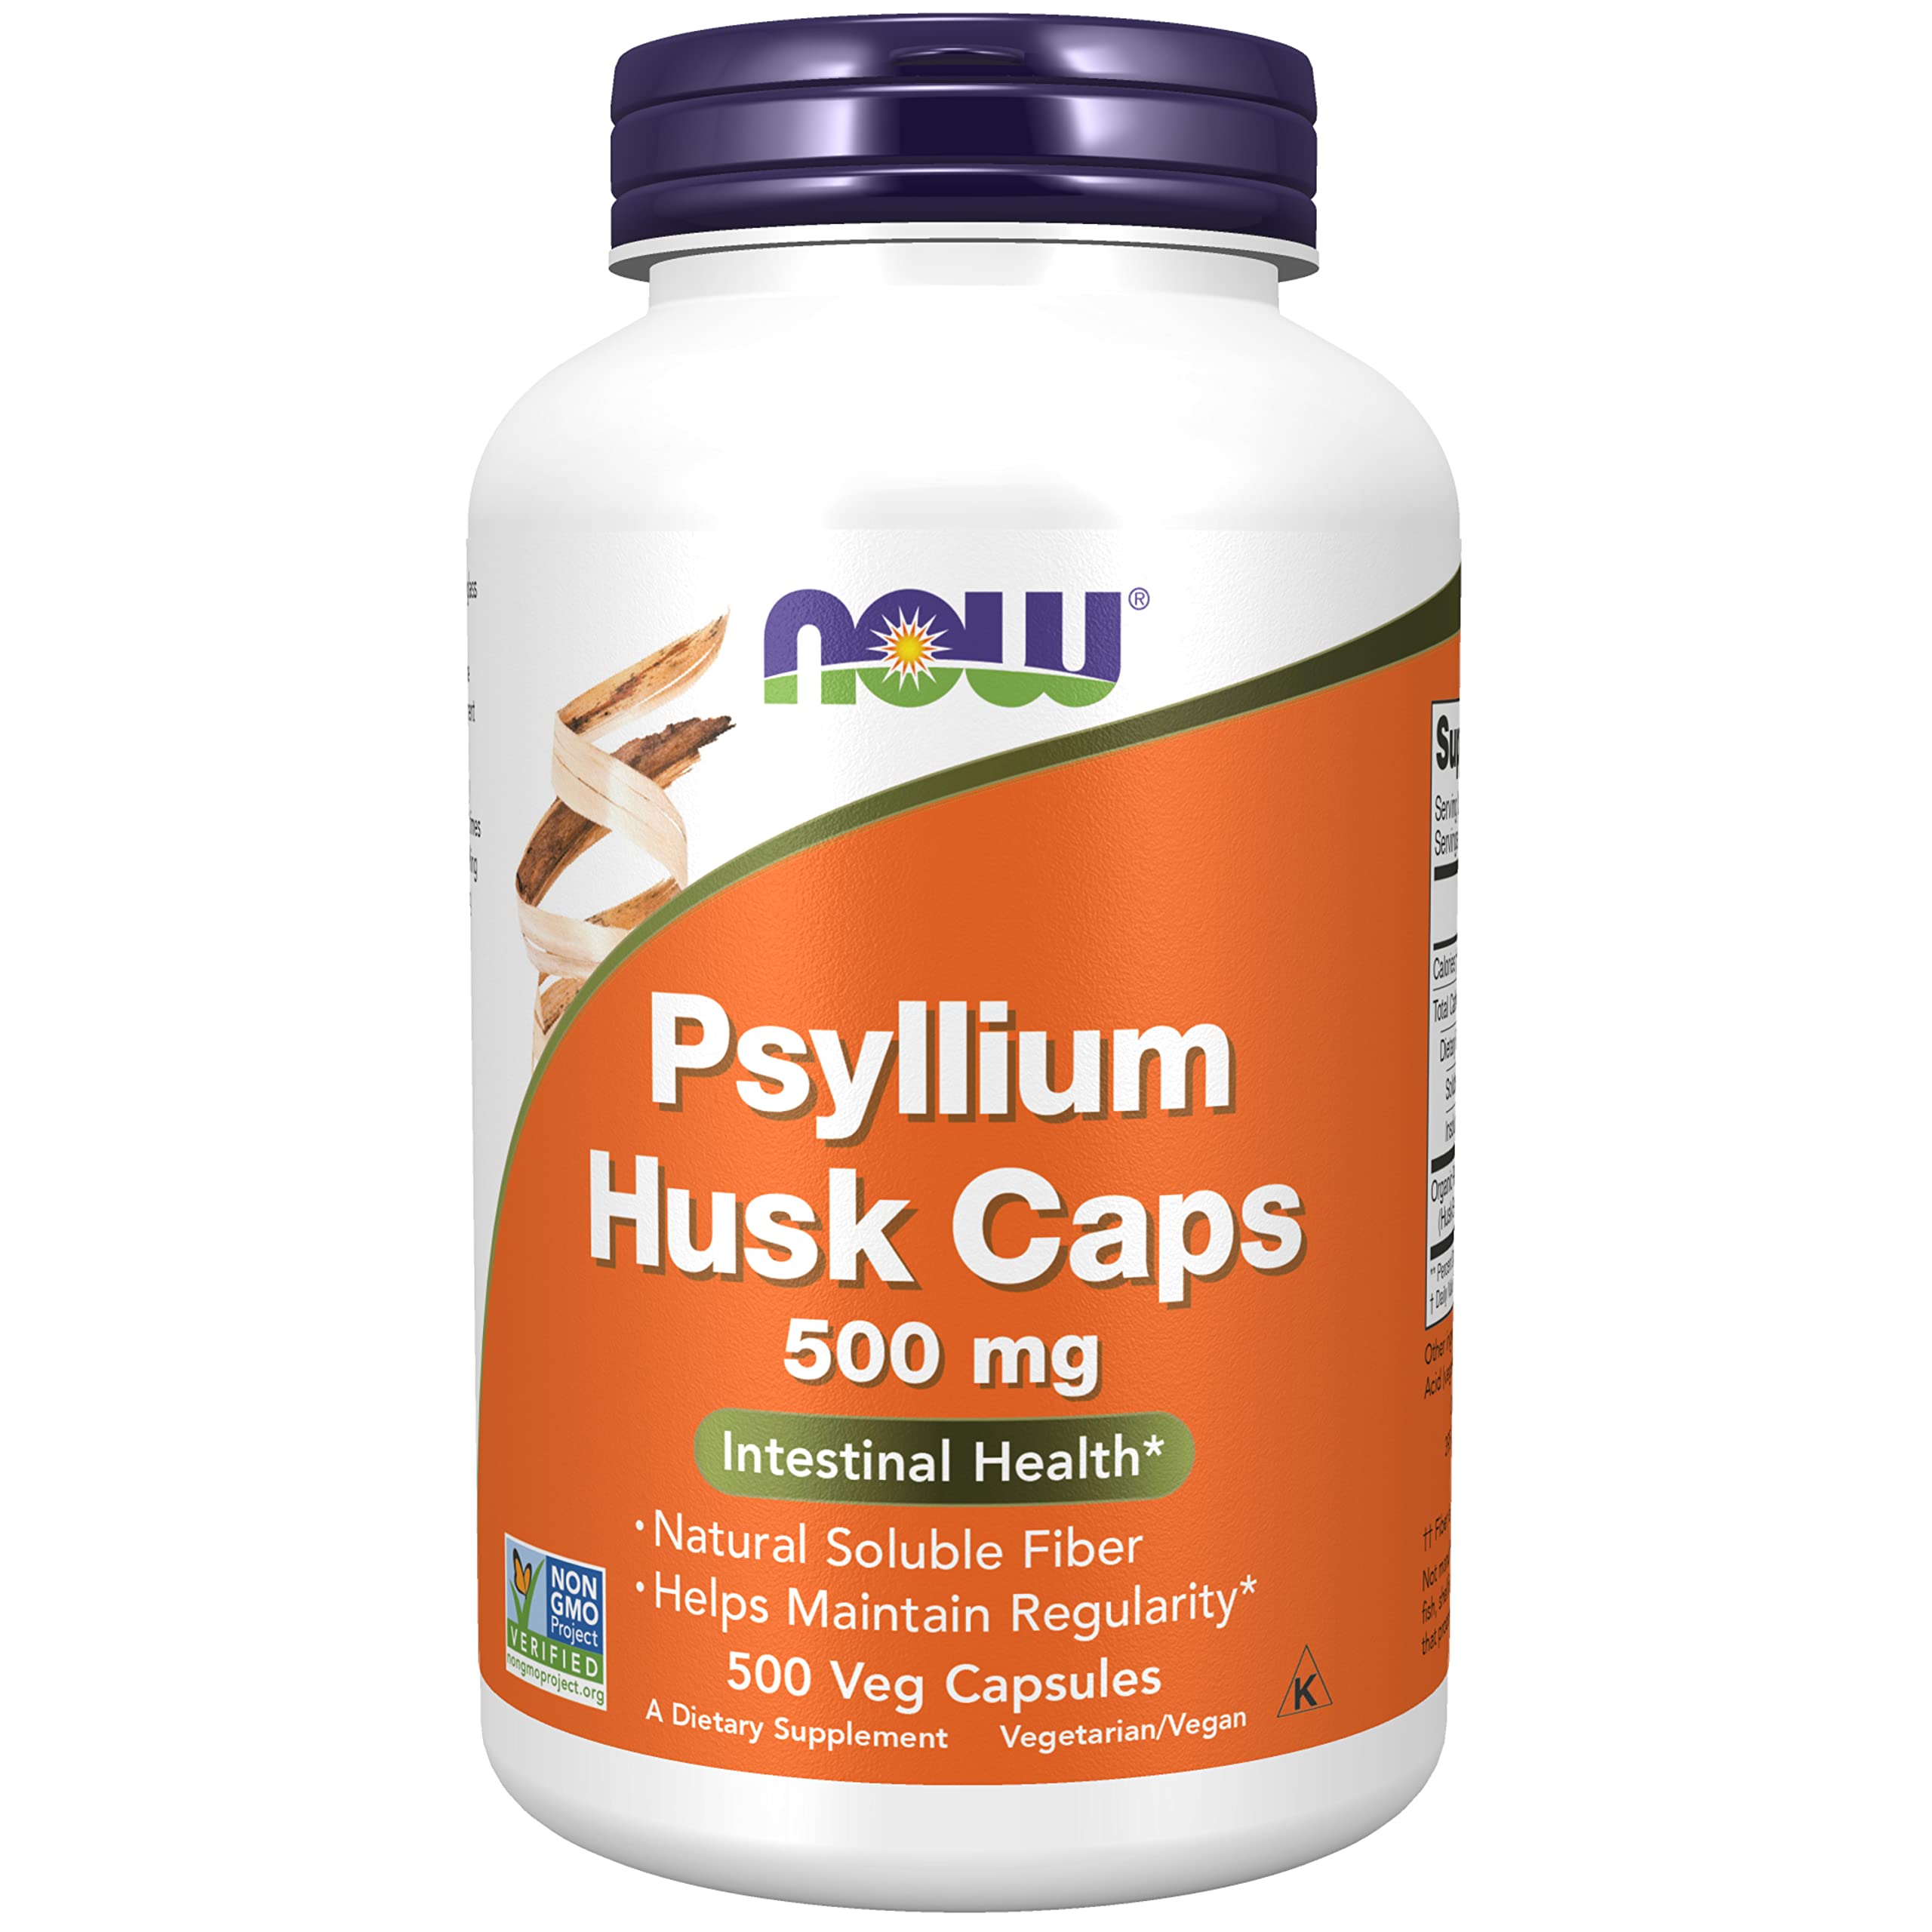 Book Cover NOW Supplements, Psyllium Husk Caps 500 mg, Non-GMO Project Verified, Natural Soluble Fiber, Intestinal Health*, 500 Veg Capsules 166.0 Servings (Pack of 1)